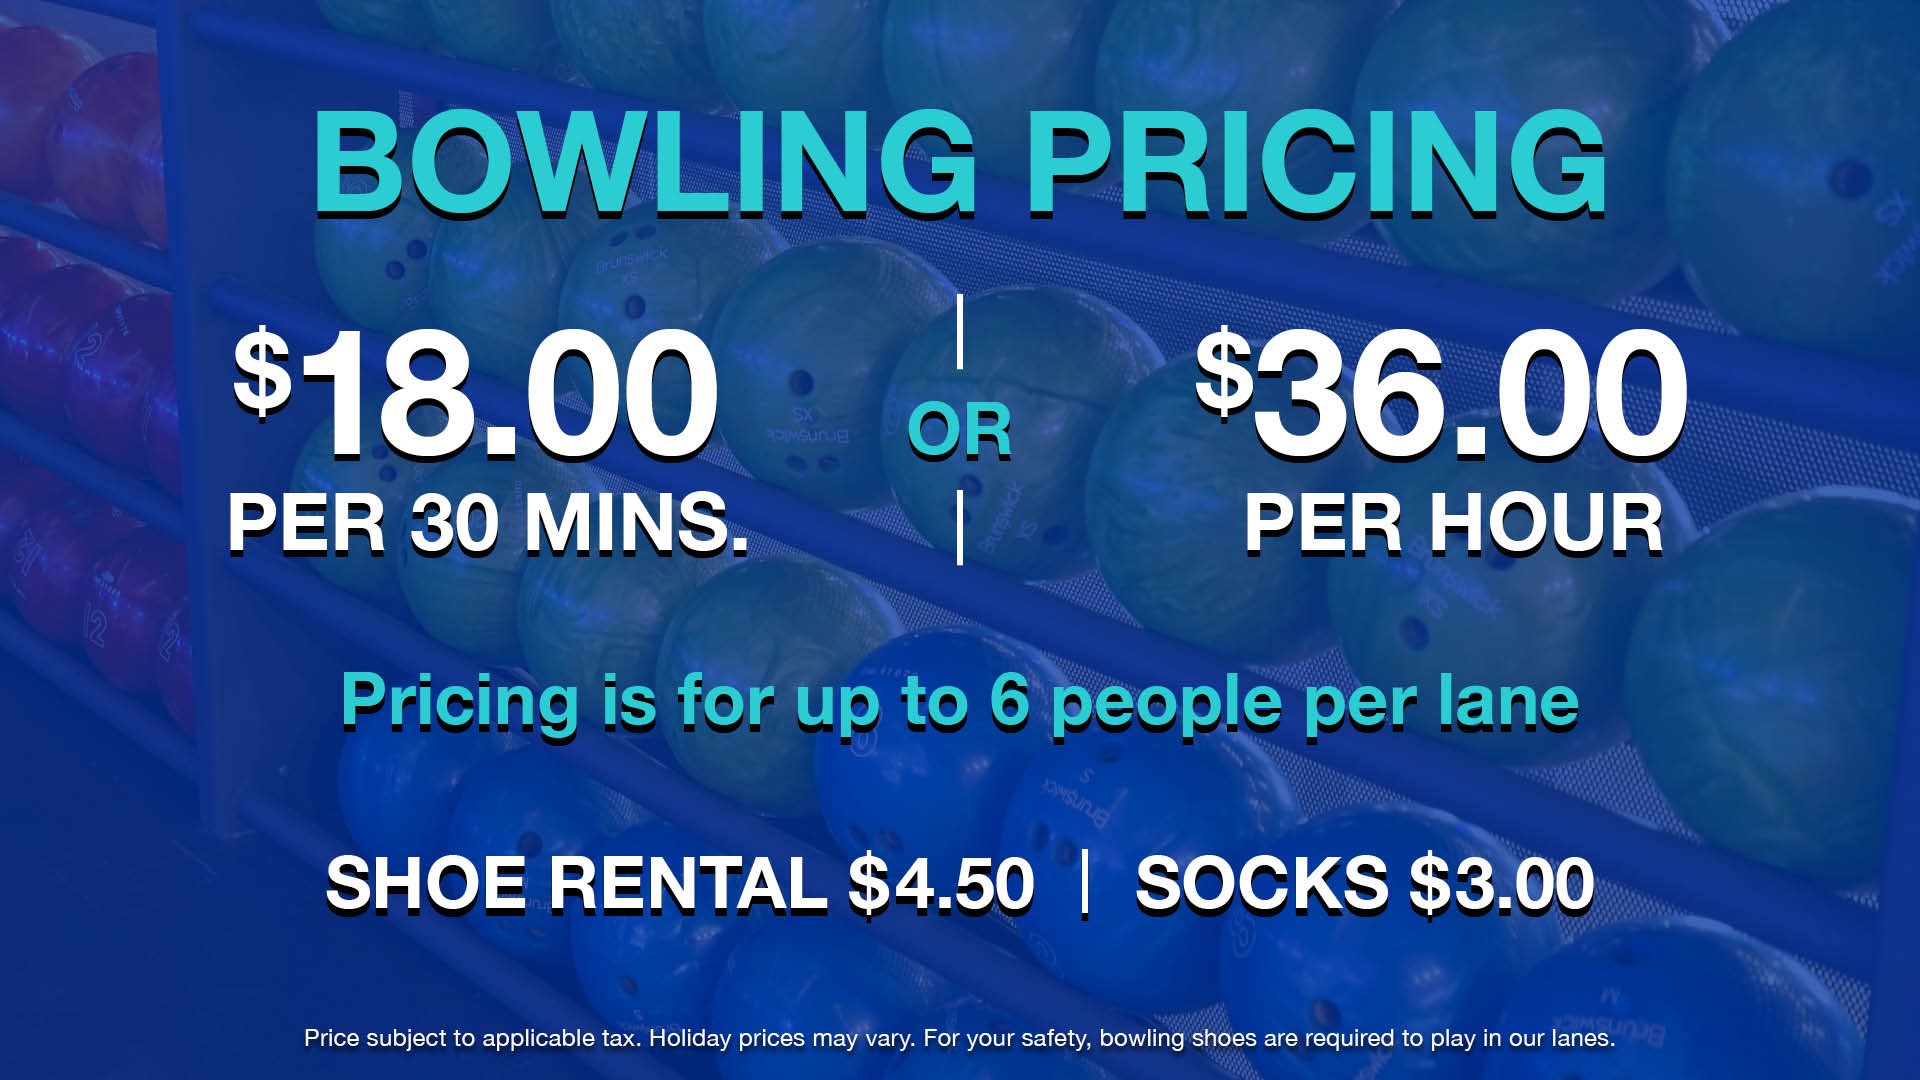 Bowling prices $18 per 30 mins, $36 per hour (up to 6 people per lane)